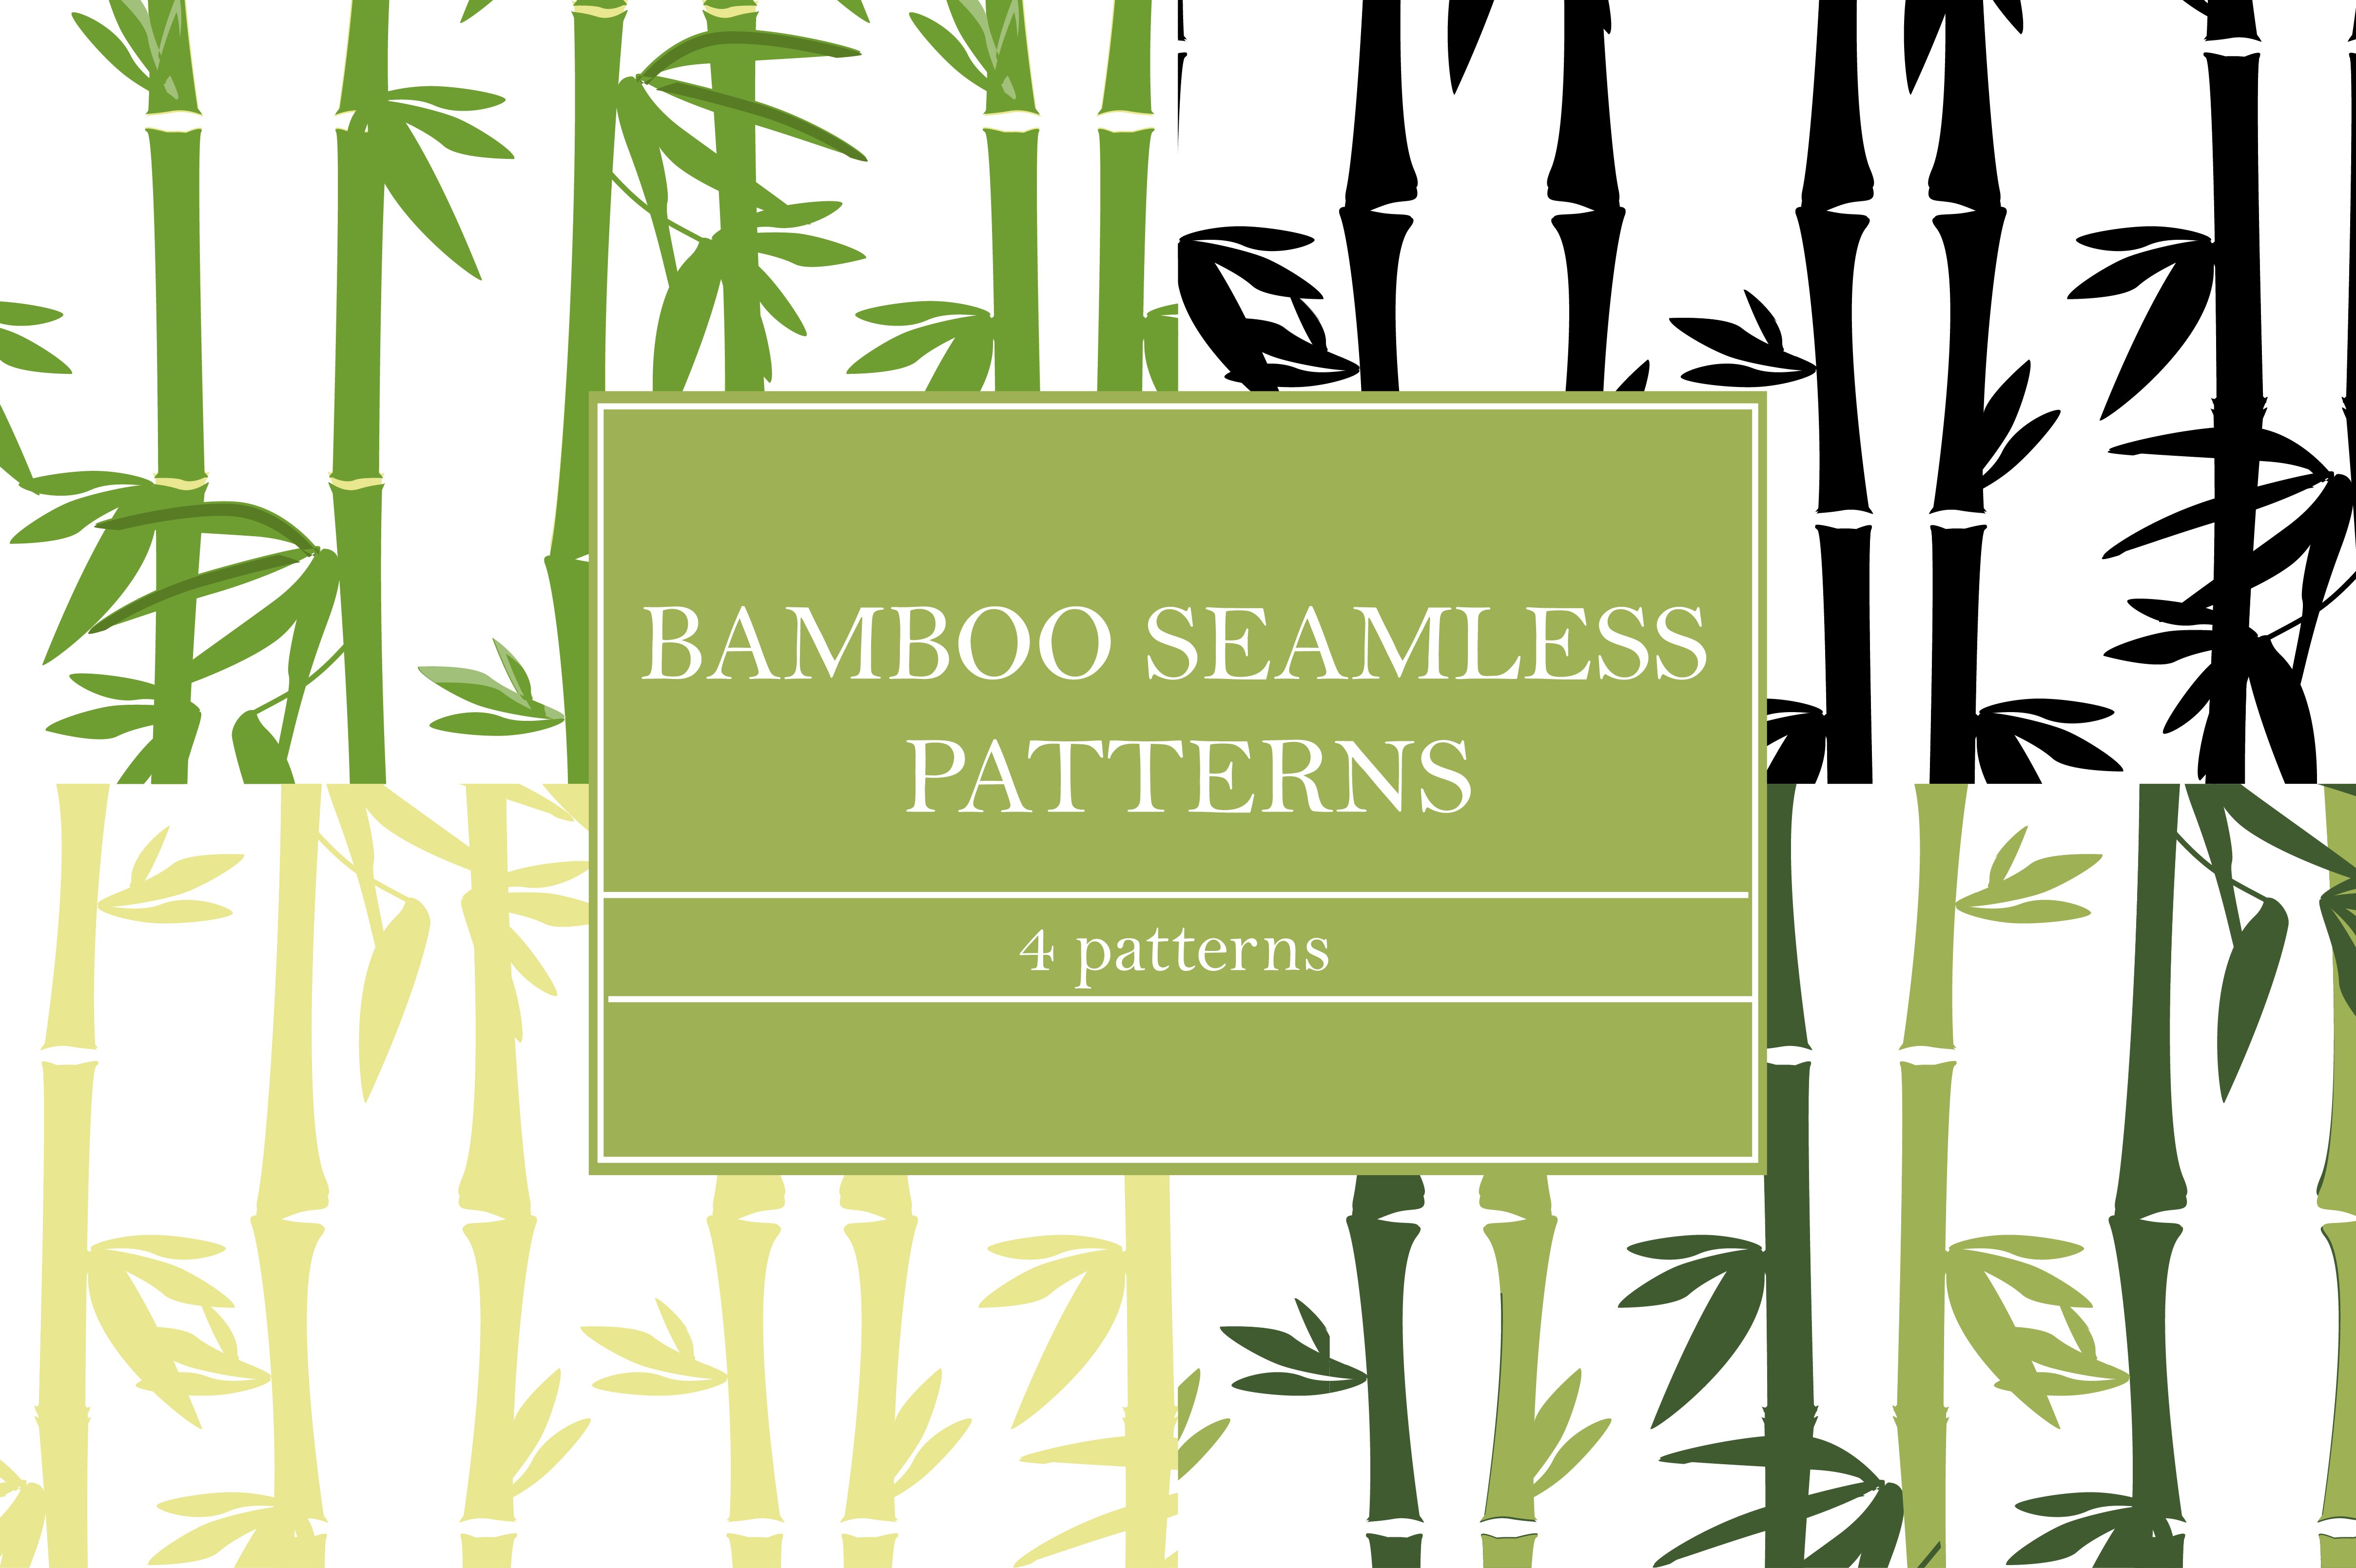 Bamboo pattern with the words bamboo seamless patterns.